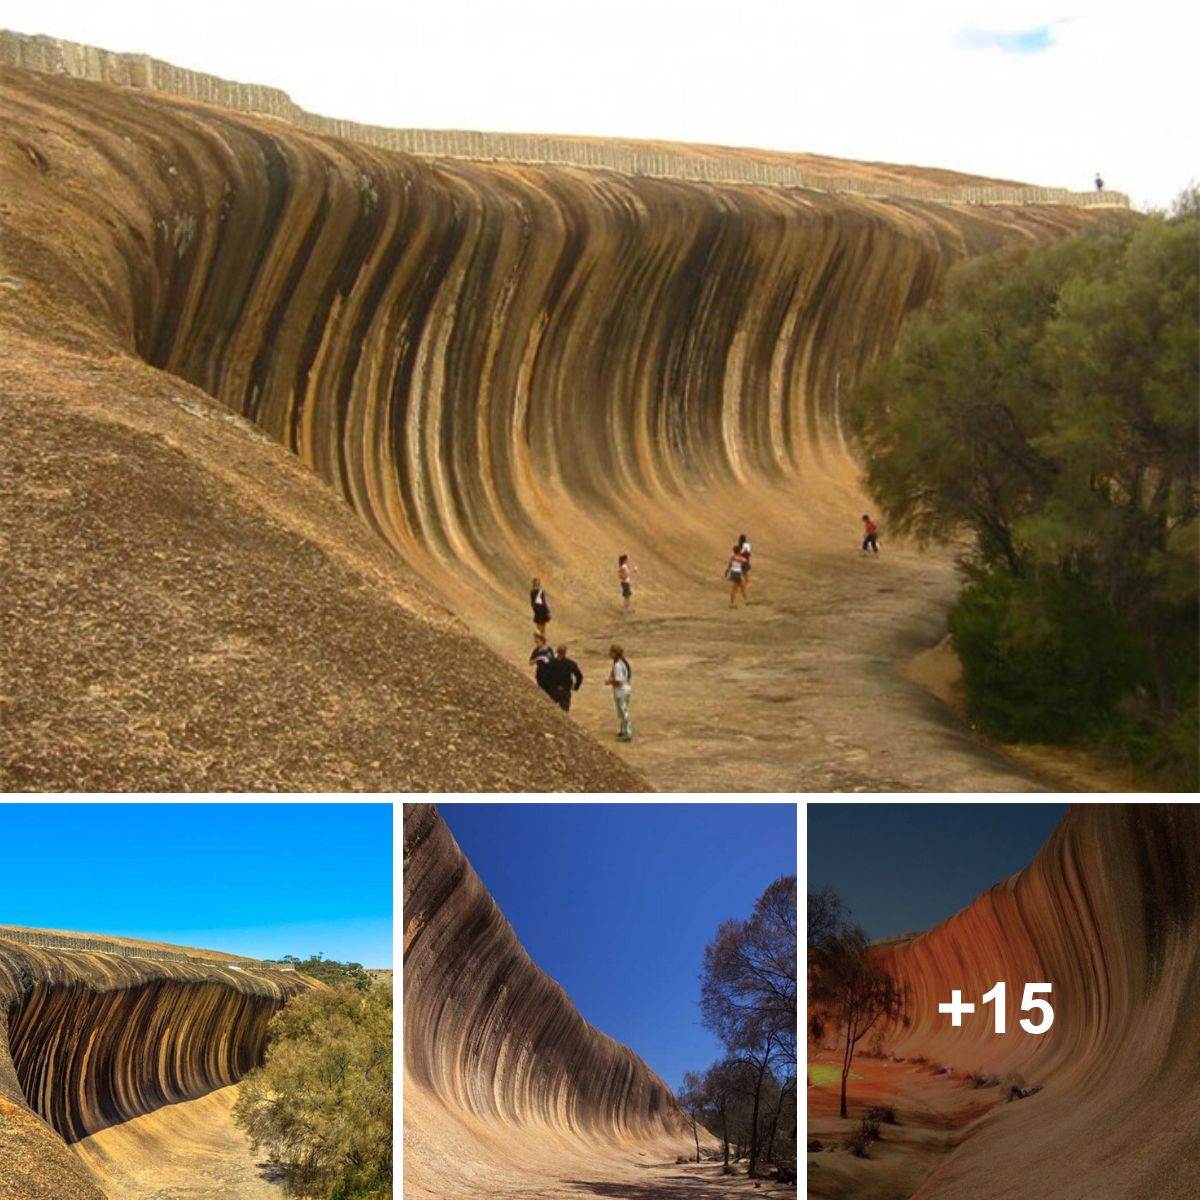 The amazing stone valley: The 60-million-year-old rock wall looks like a gigantic stone wall.